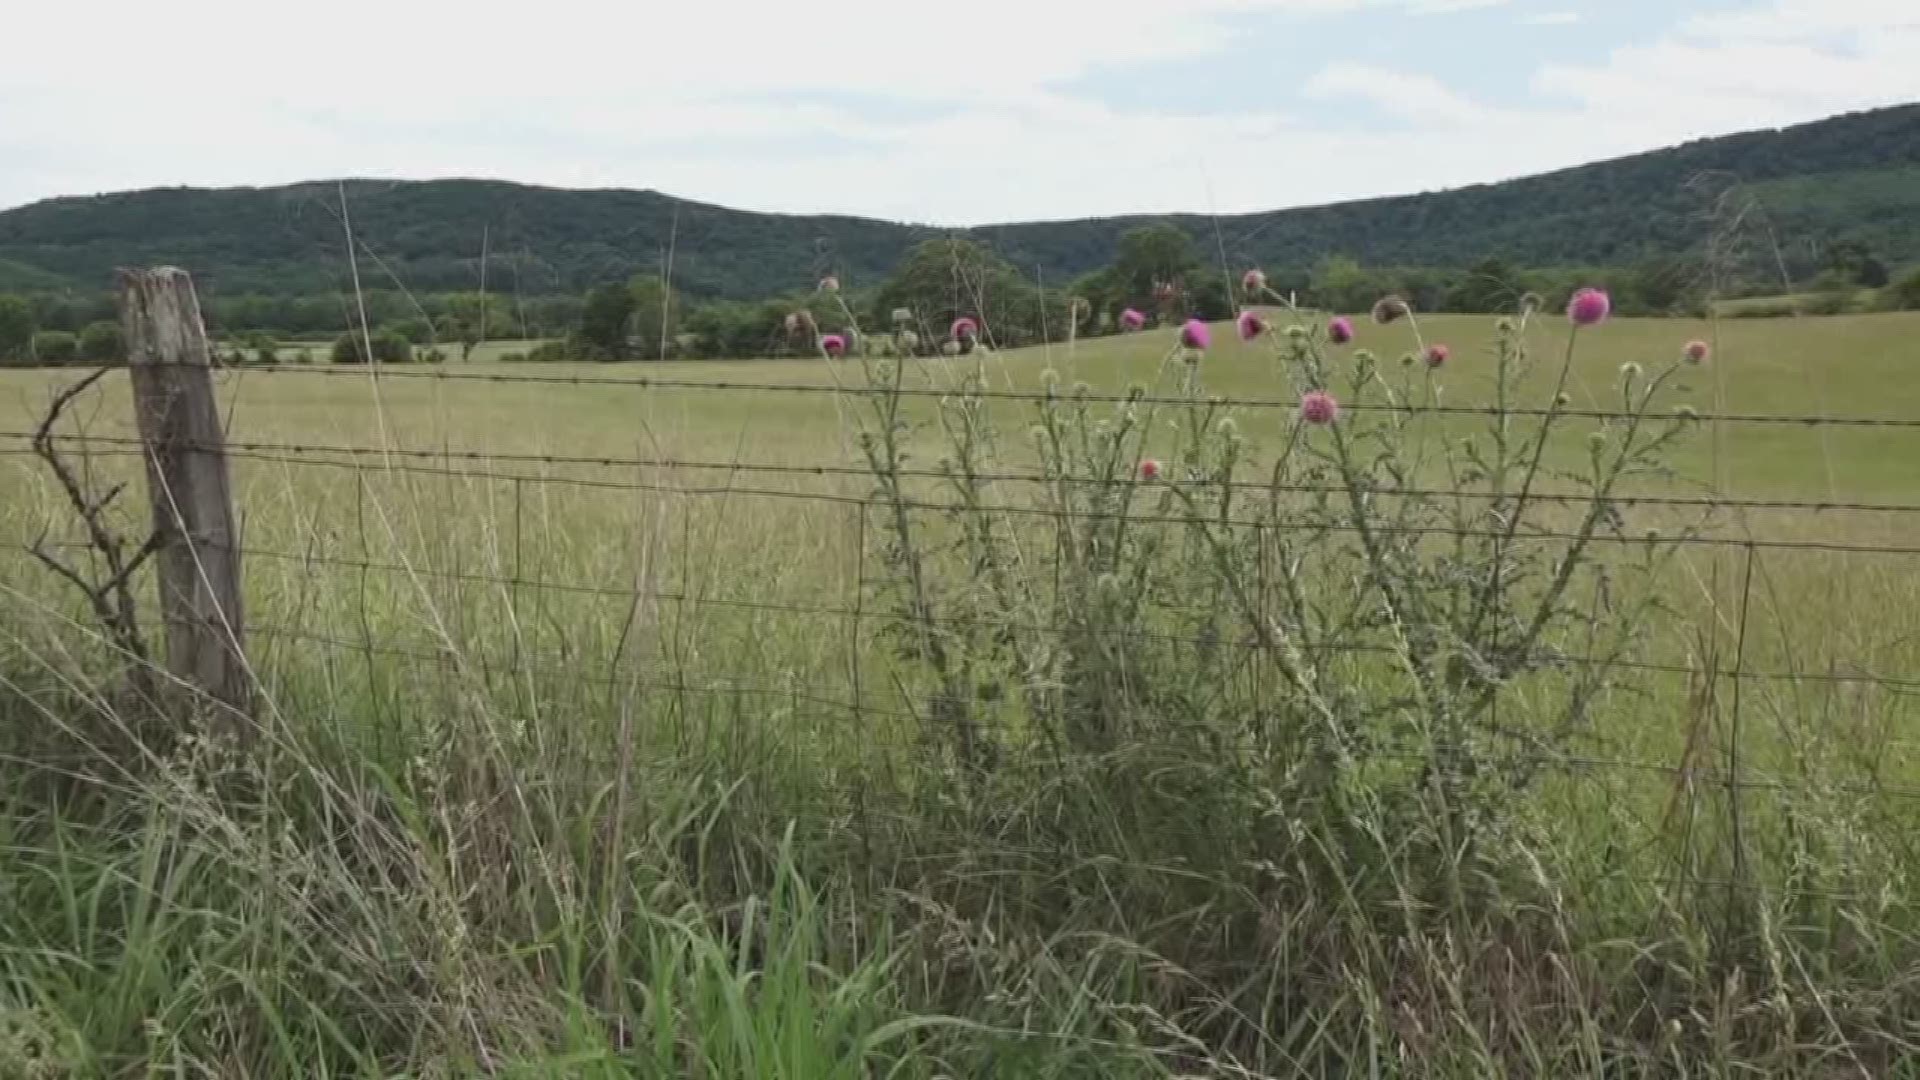 The state and non-profit groups celebrated the acquisition of more than 950 scenic acres in Cumberland County in the Grassy Cove area beside the ambitious Cumberland Trail project.